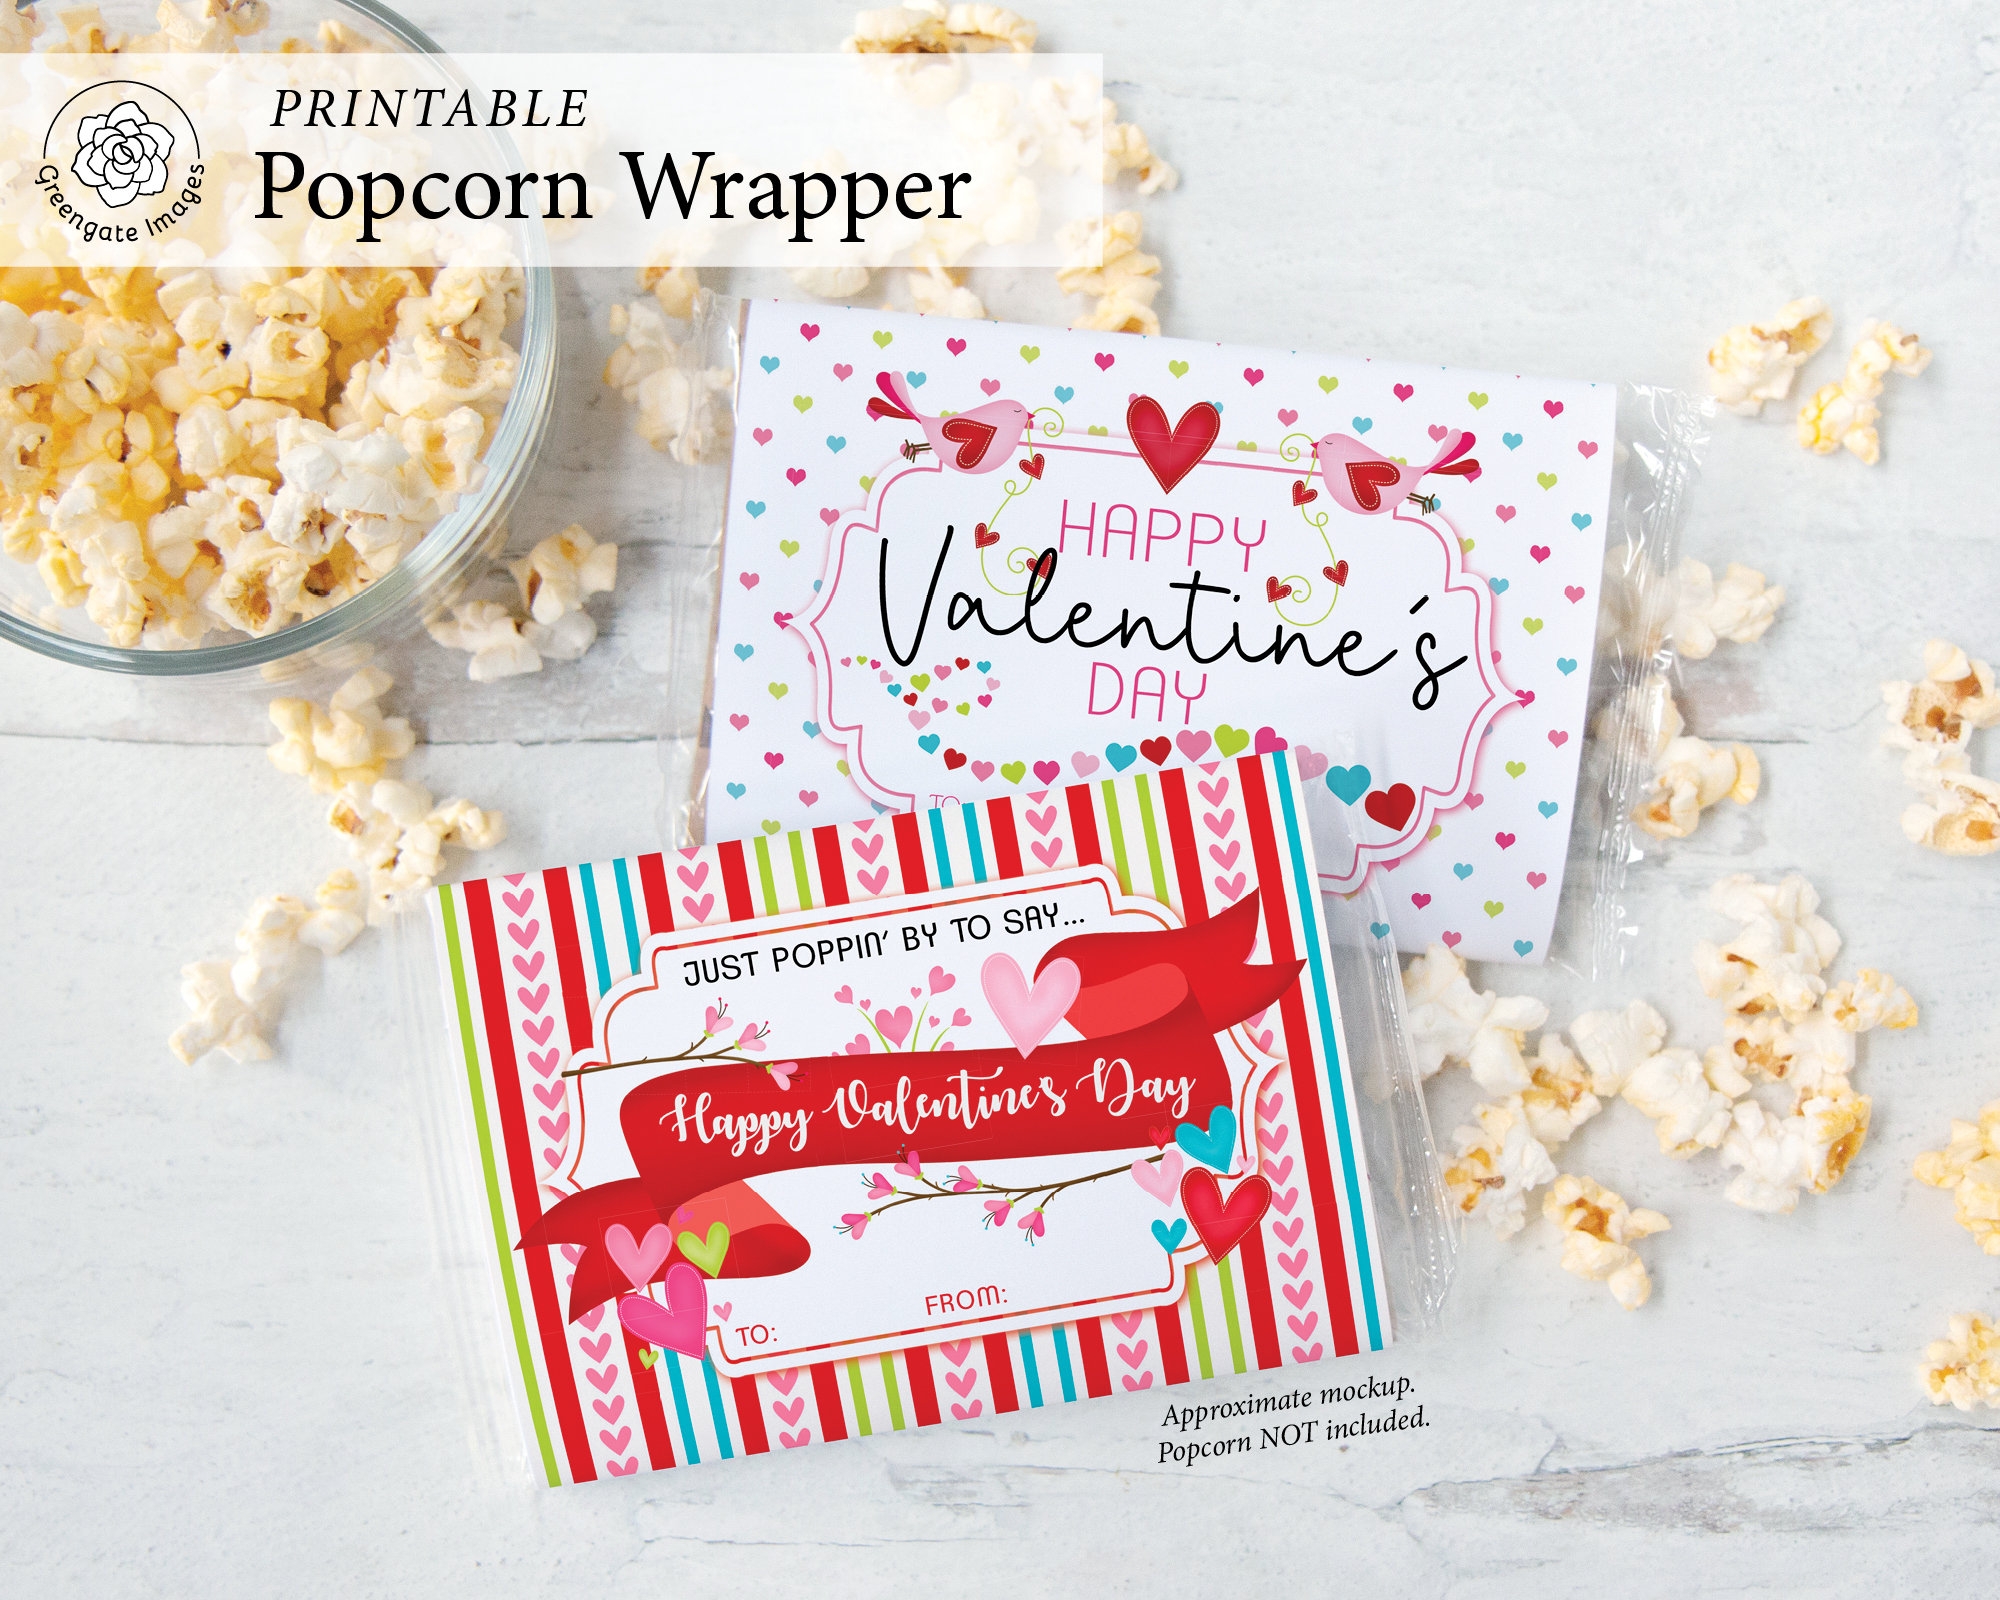 Valentine s Day Popcorn Wrapper PRINTABLE Microwave Popcorn Wrapper That Is Ready To Download Two Styles With Colorful Hearts And Birds Etsy